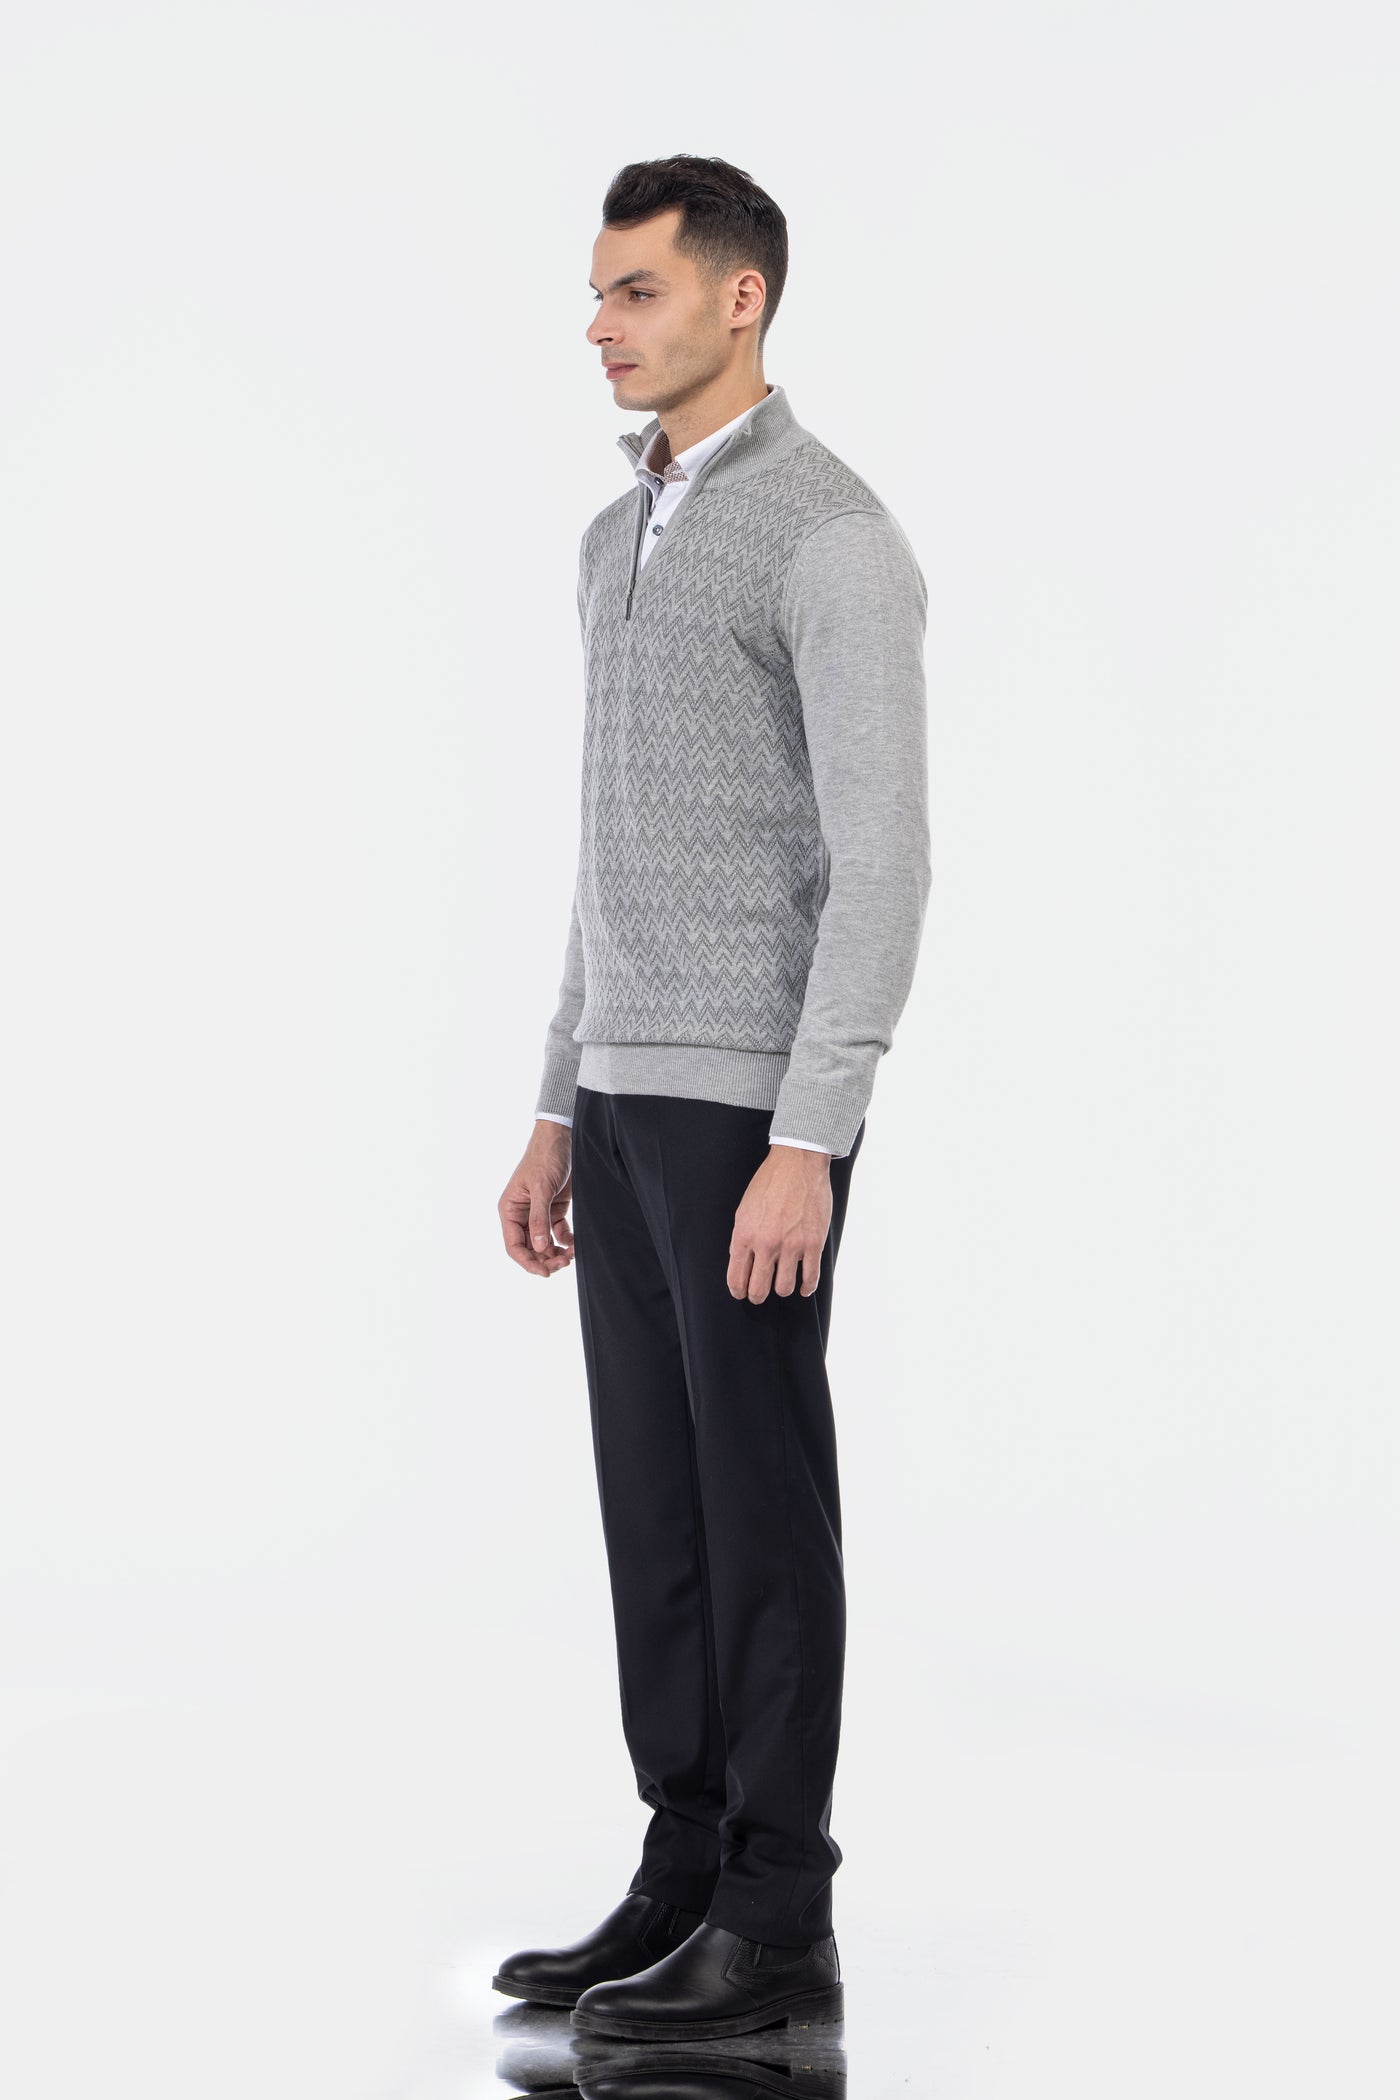 Jacquard Knitted Quarter Zip Gray  Pullover